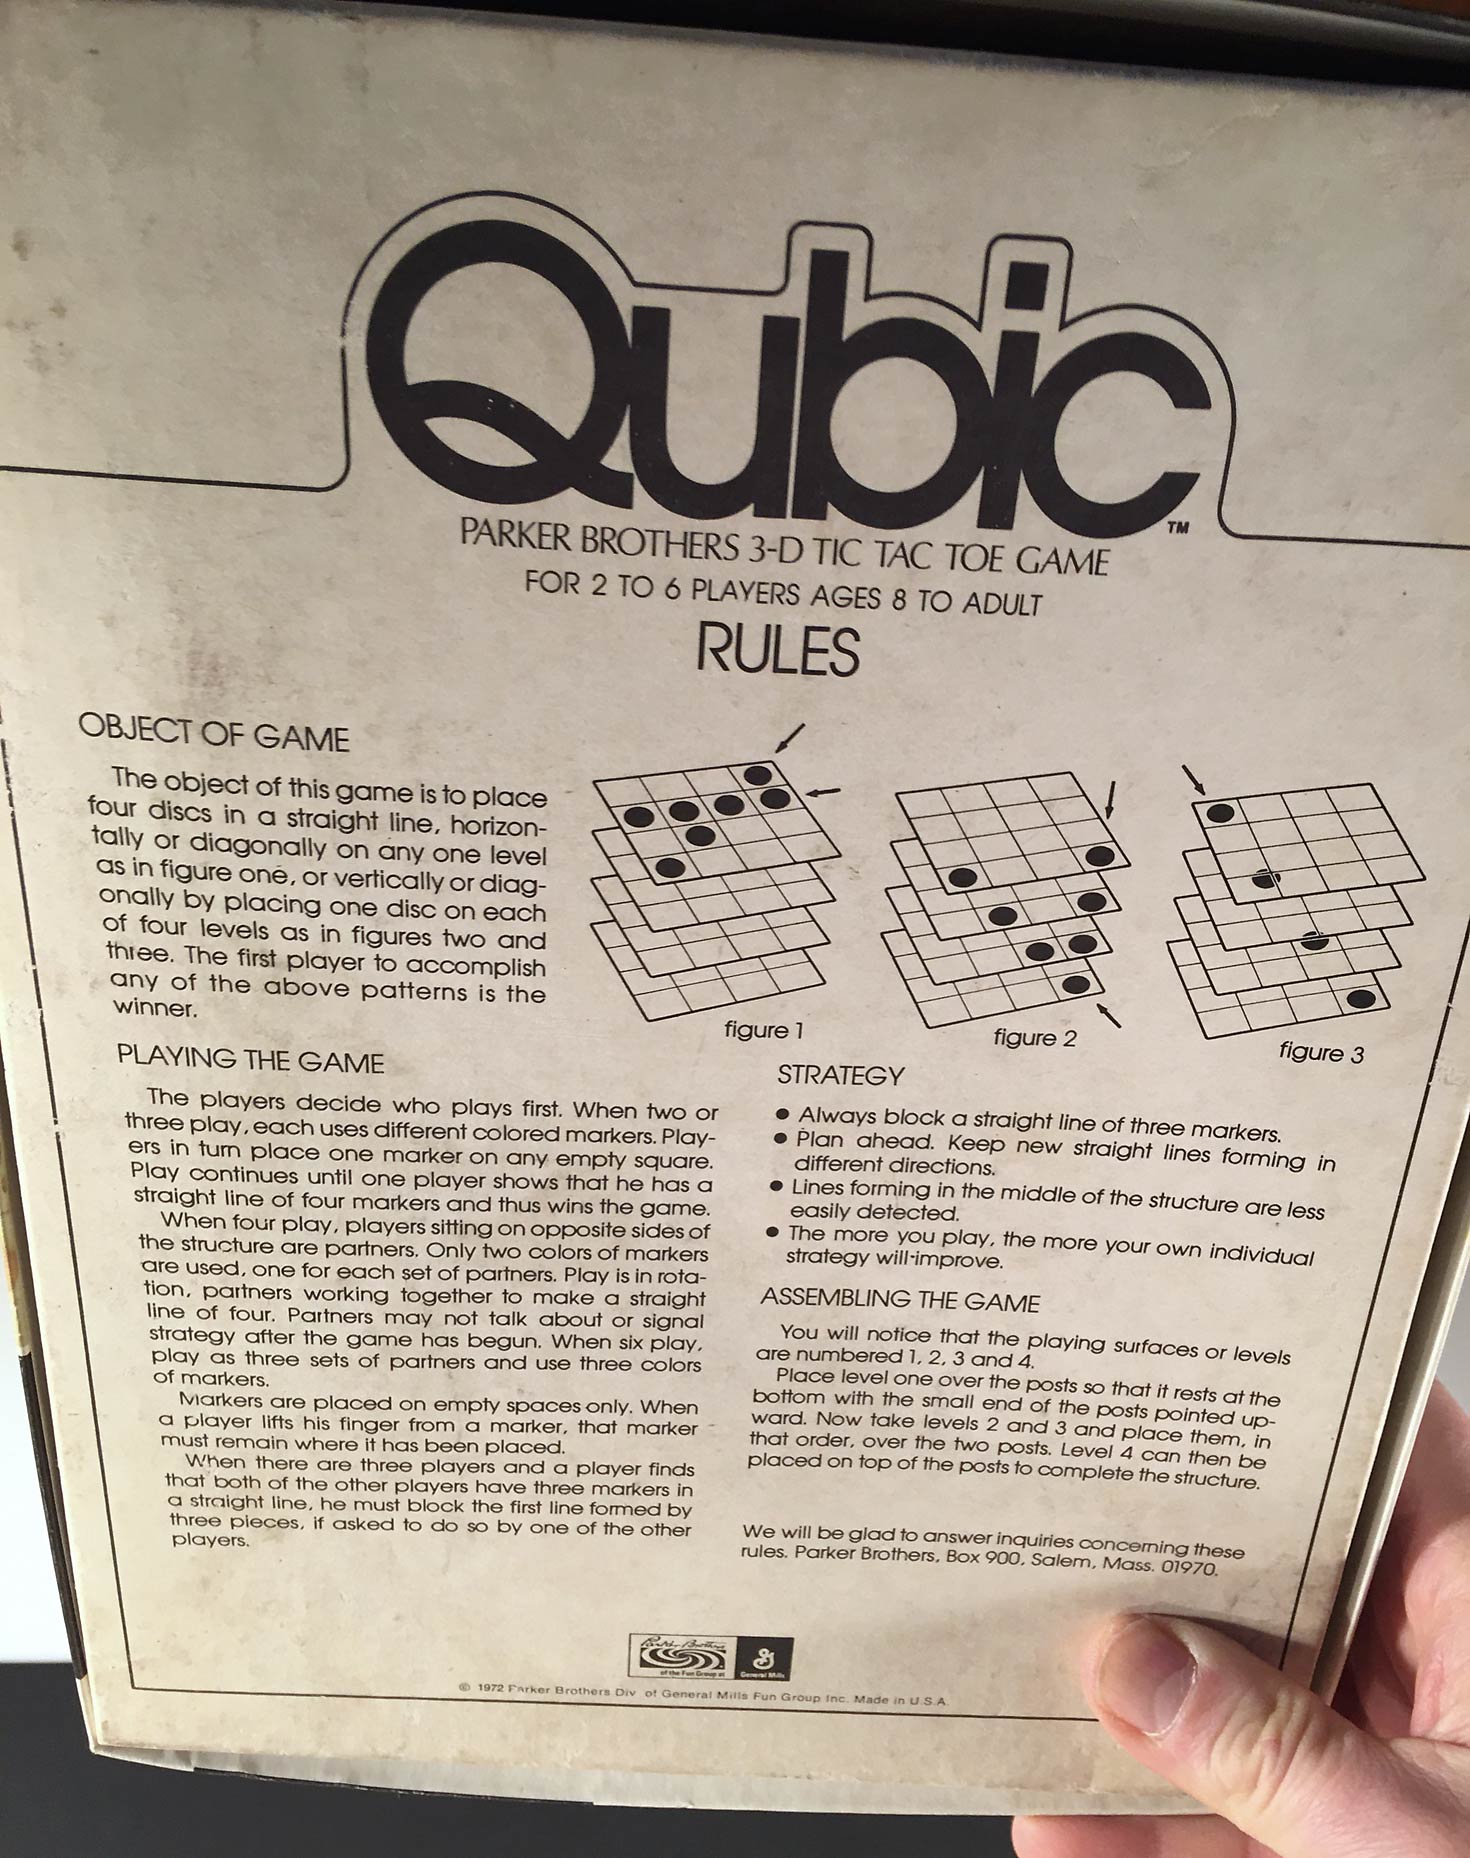 Select Game Pieces & Parts 1968 Qubic Parker Brothers 3-D Tic Tac Toe Game 7 